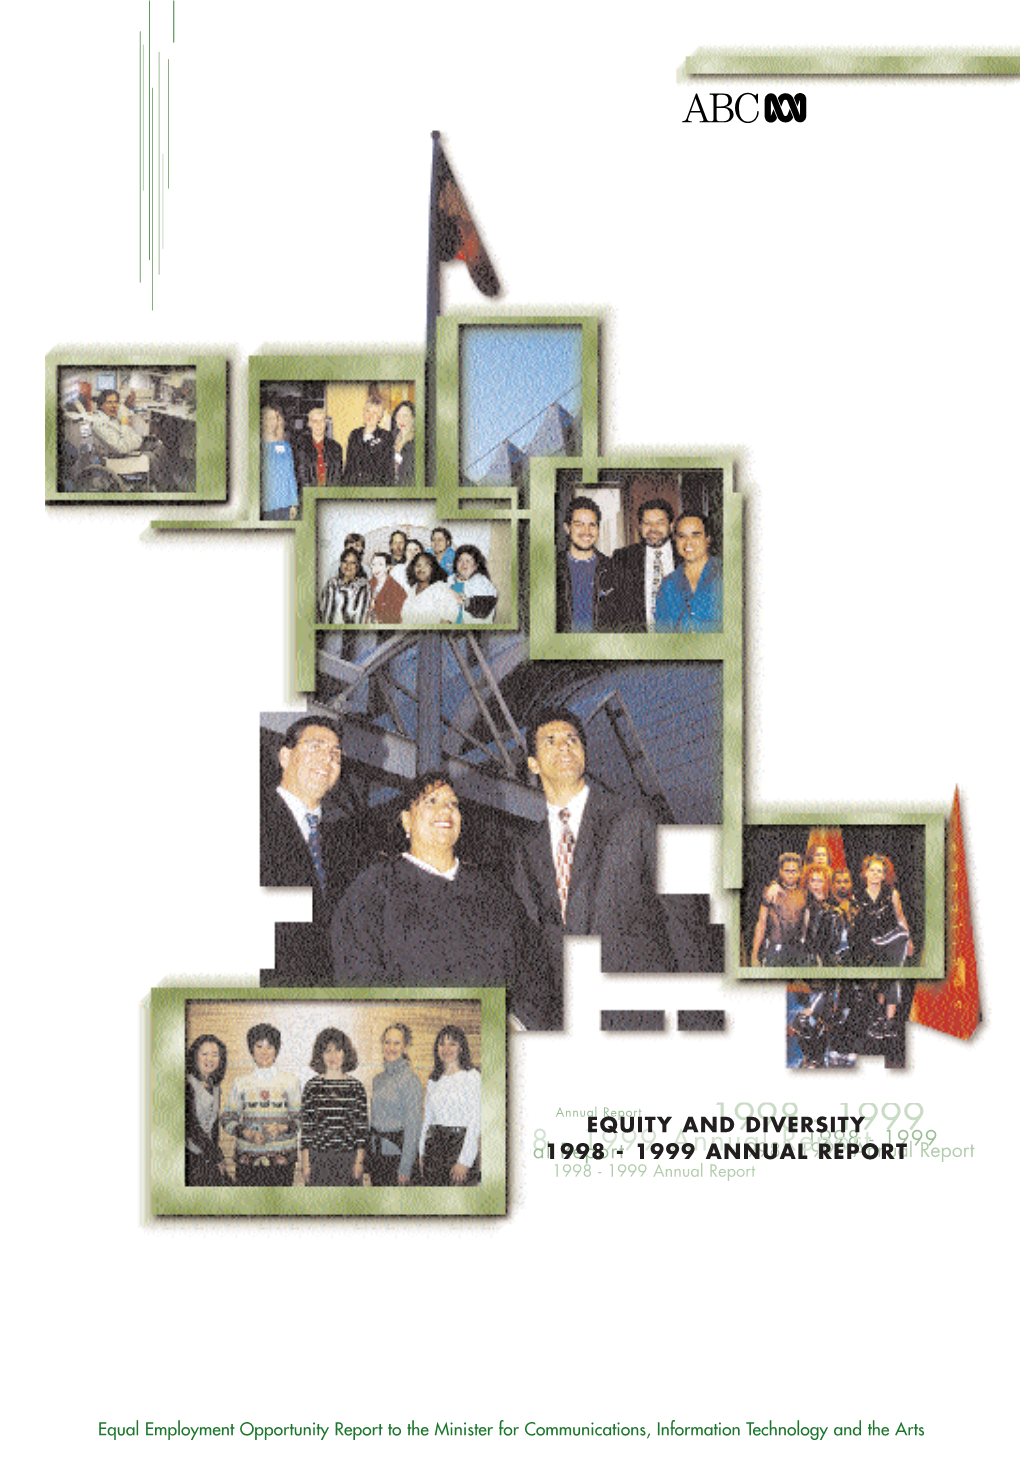 Equity Diversity Annual Report 1998-1999